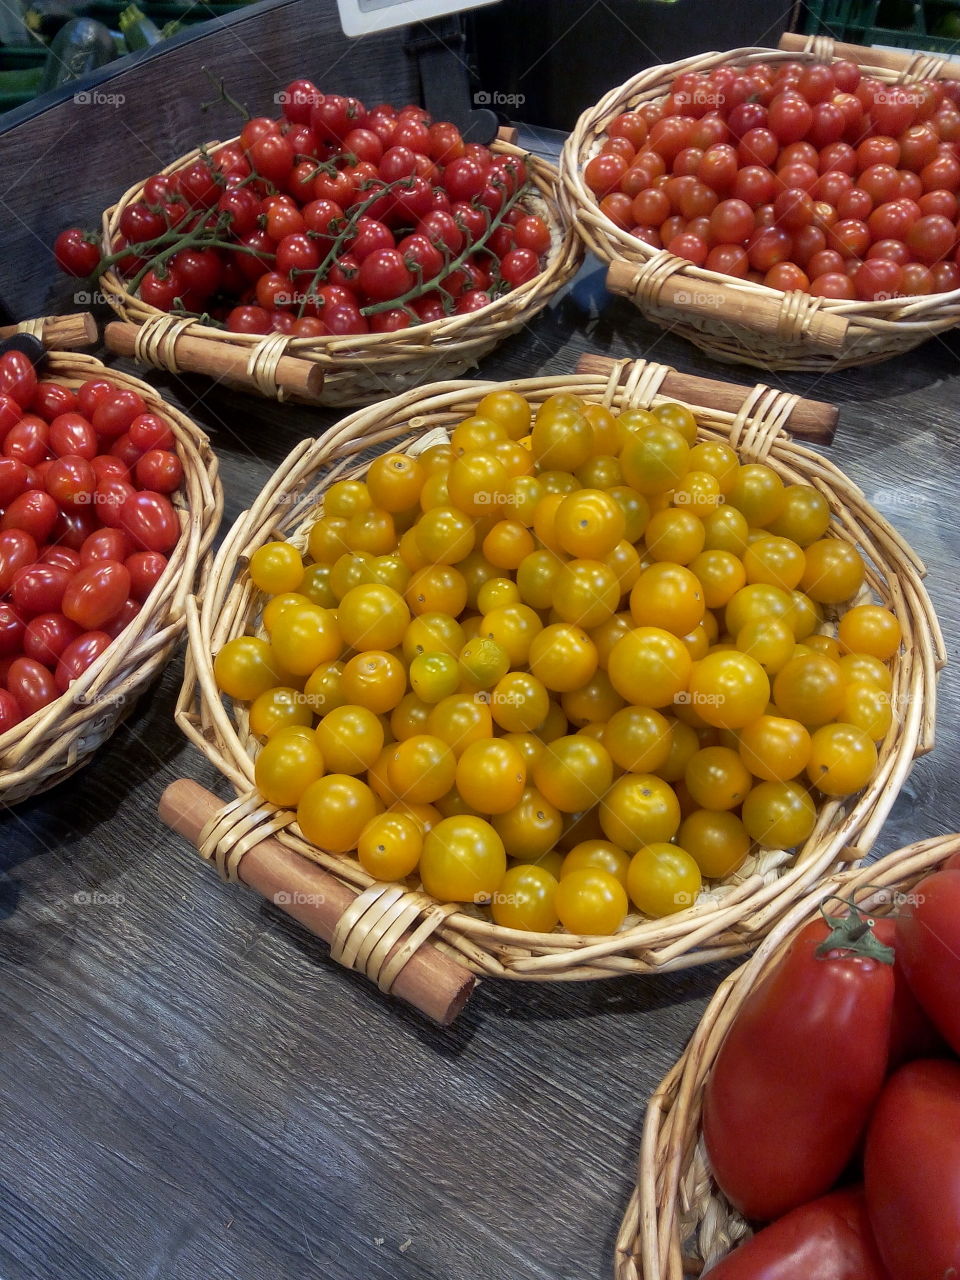 Red and yellow tomatoes - Choice of delicious cocktail and cherry tomatoes